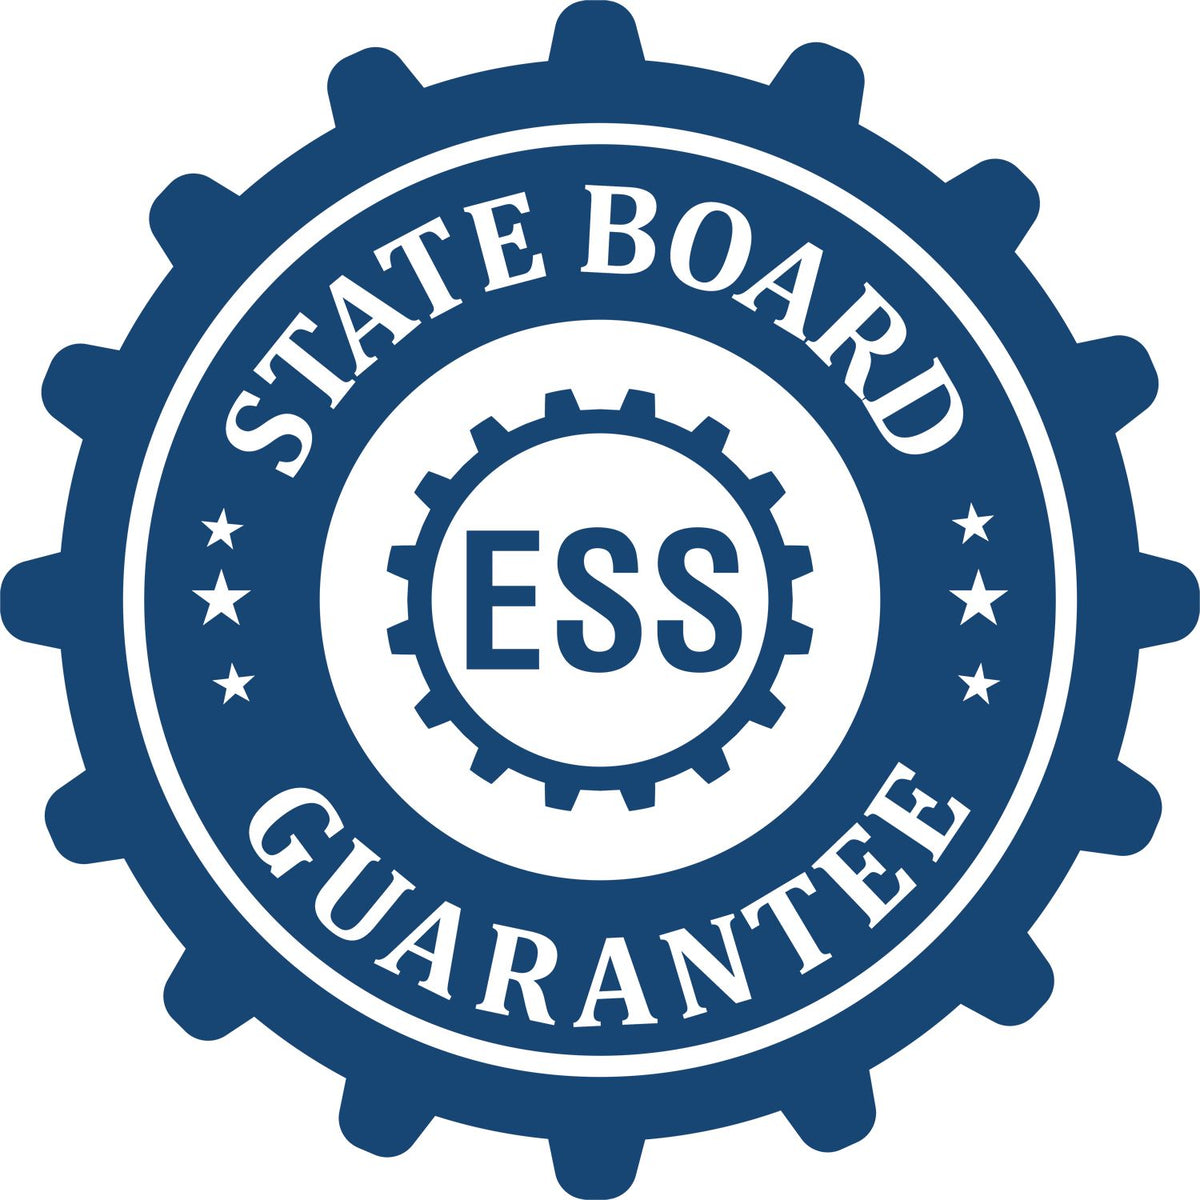 An emblem in a gear shape illustrating a state board guarantee for the Gift Minnesota Land Surveyor Seal